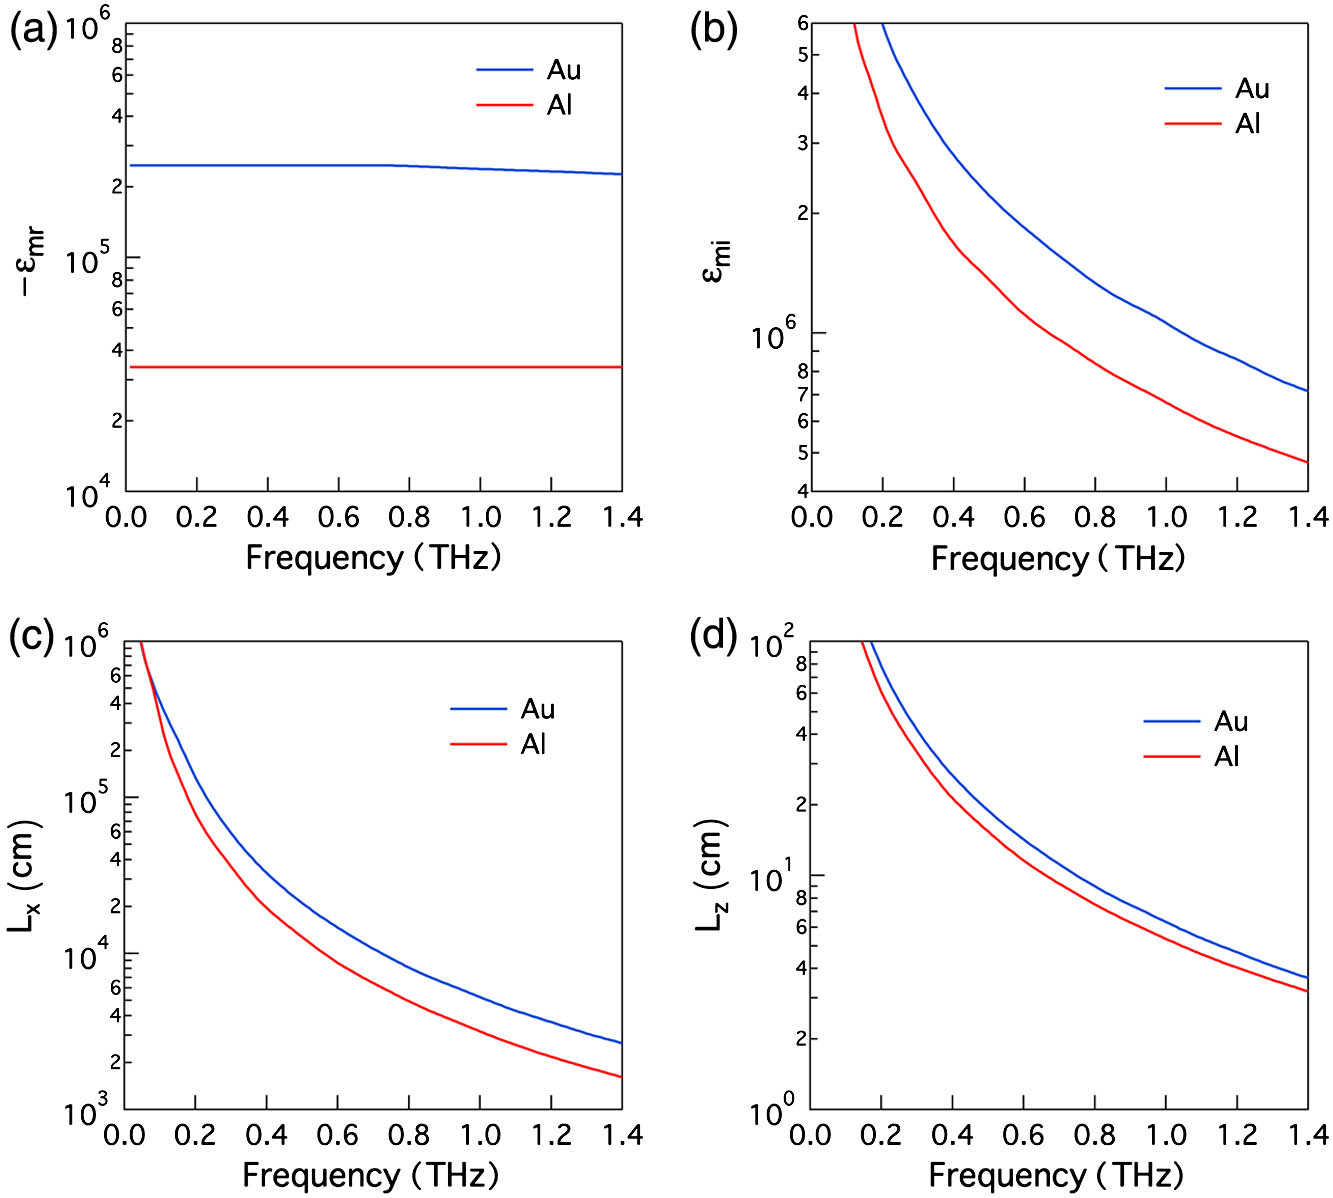 Dielectric and SPP propagation properties for Au and Al at terahertz frequencies based on published data, assuming εd=1. (a) Real component of the dielectric constant based on a Drude model fit. (b) Real component of the dielectric constant based on a Drude model fit. (c) 1/e propagation length, Lx, along the x axis. (d) 1/e spatial extent, Lz, along the z axis.